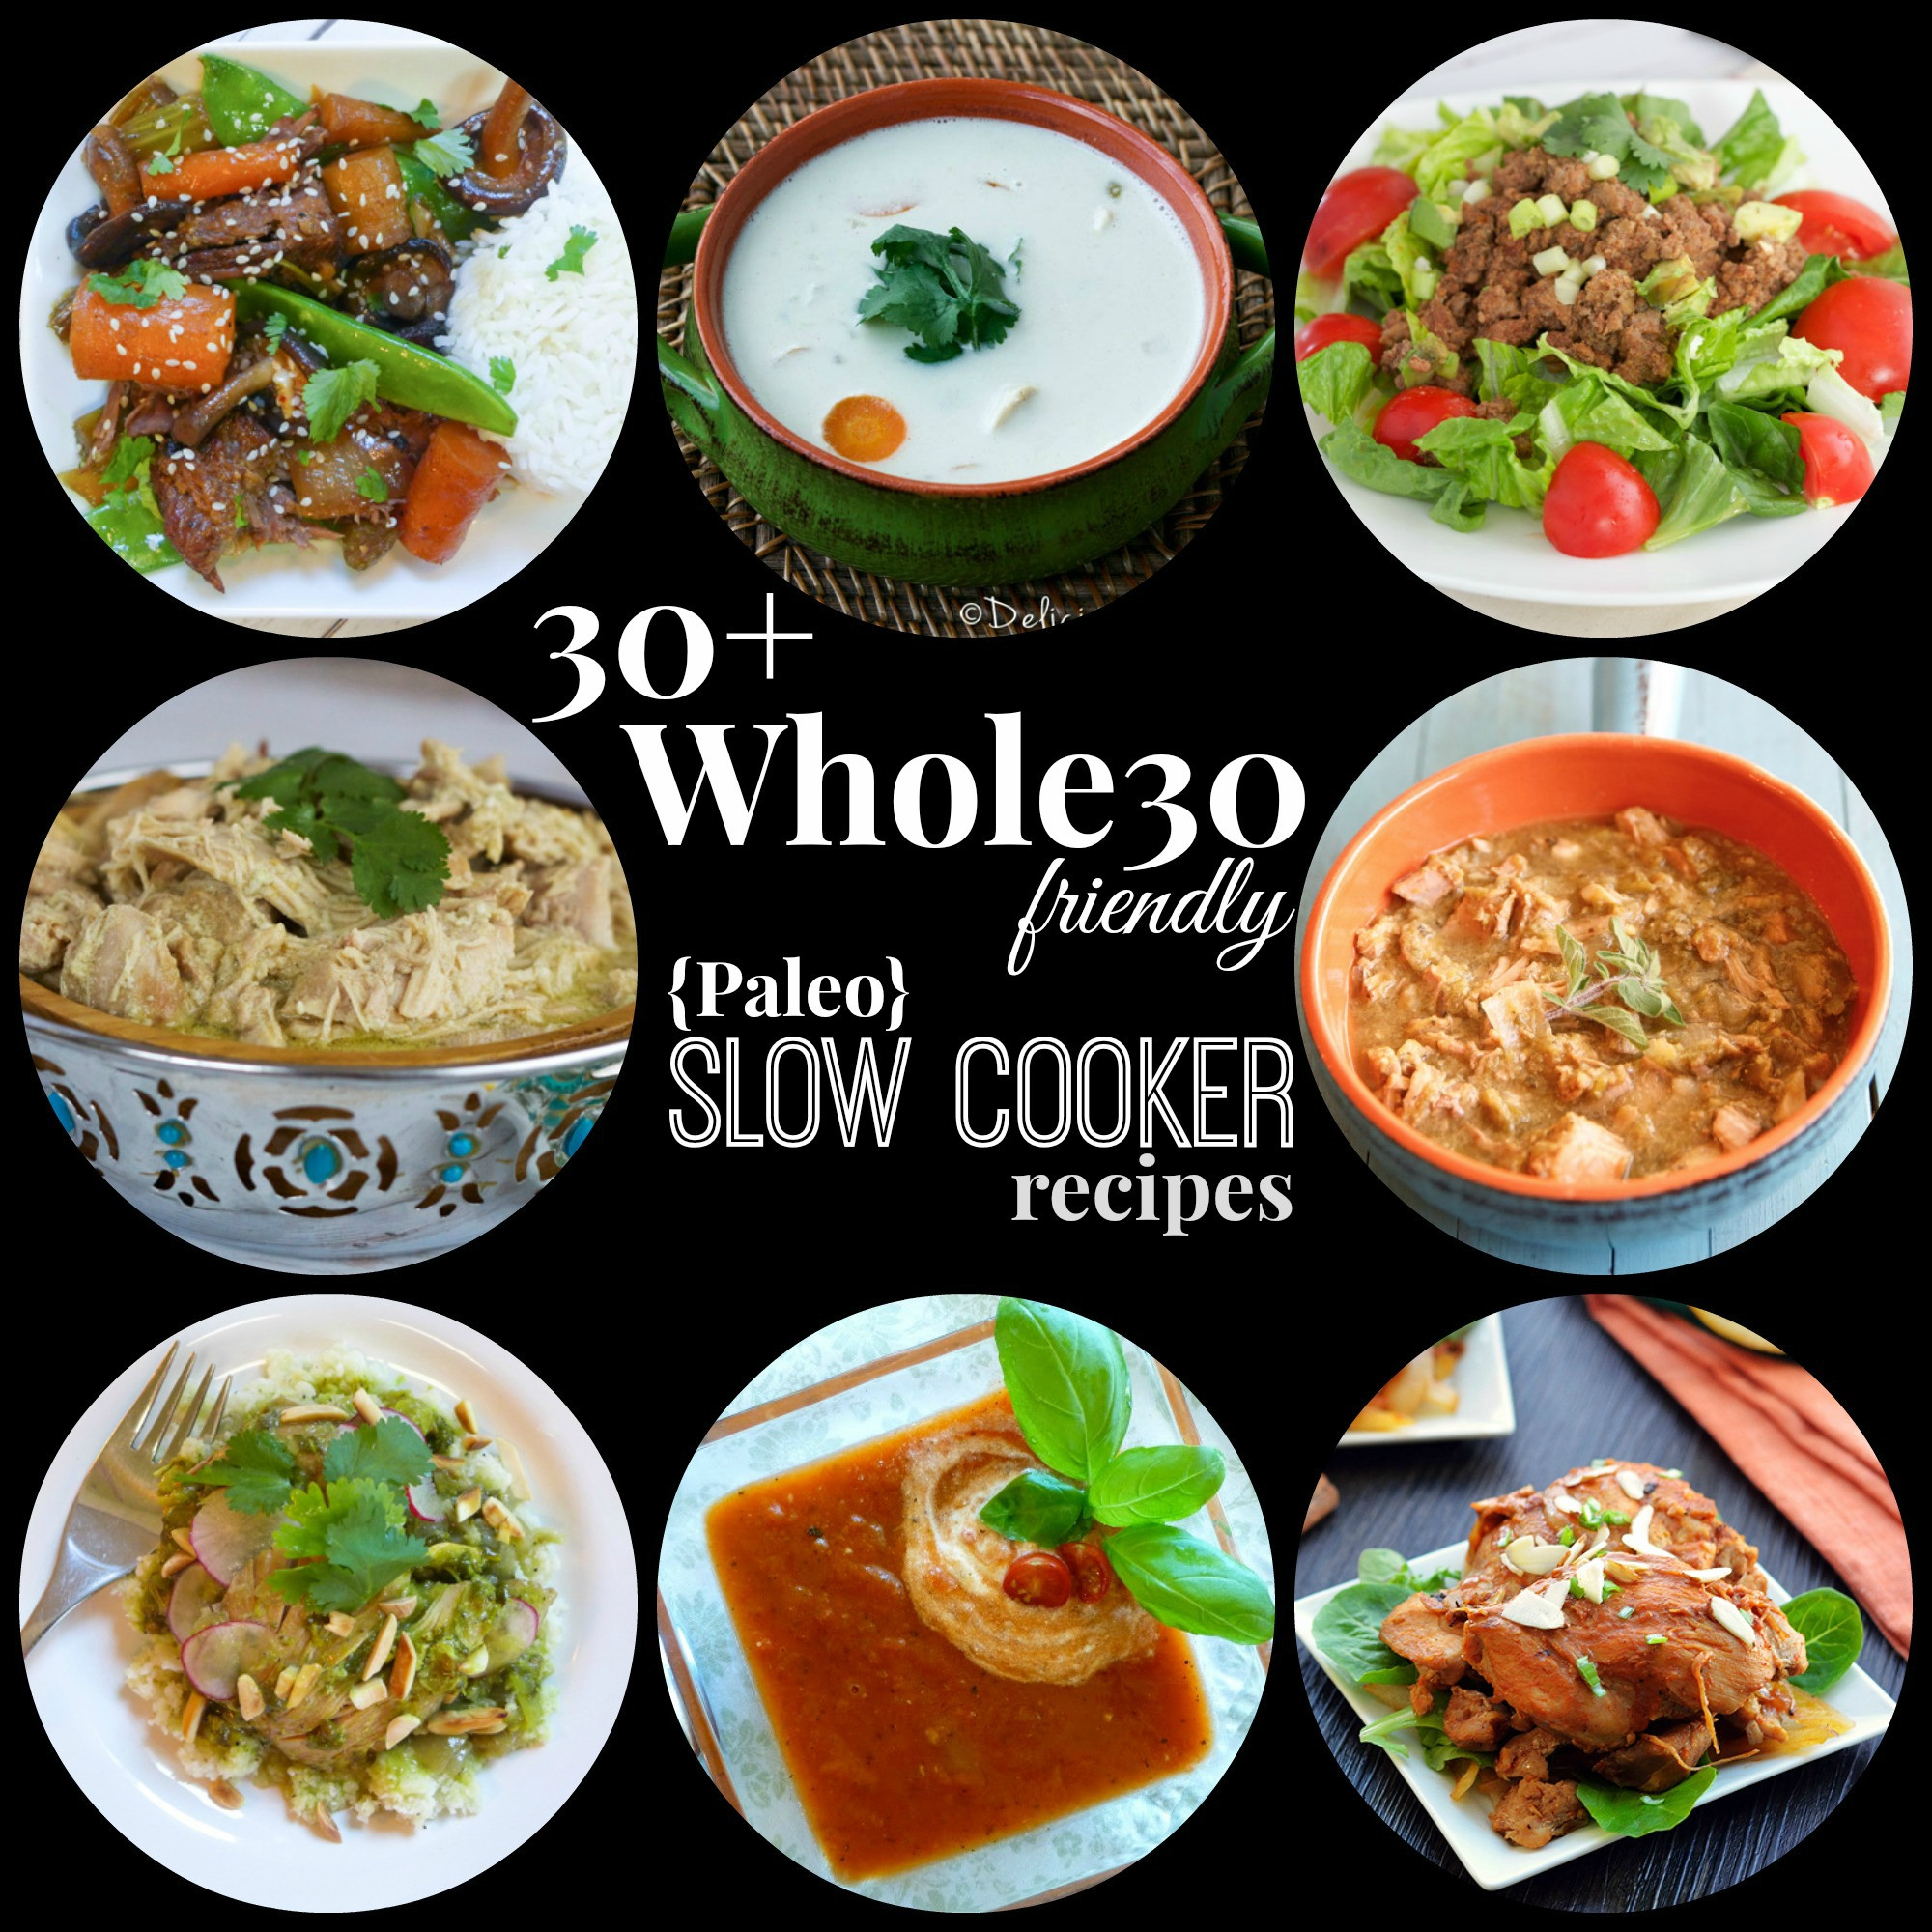 Whole30 Slow Cooker Recipes
 30 Whole 30 Friendly Slow Cooker Recipes